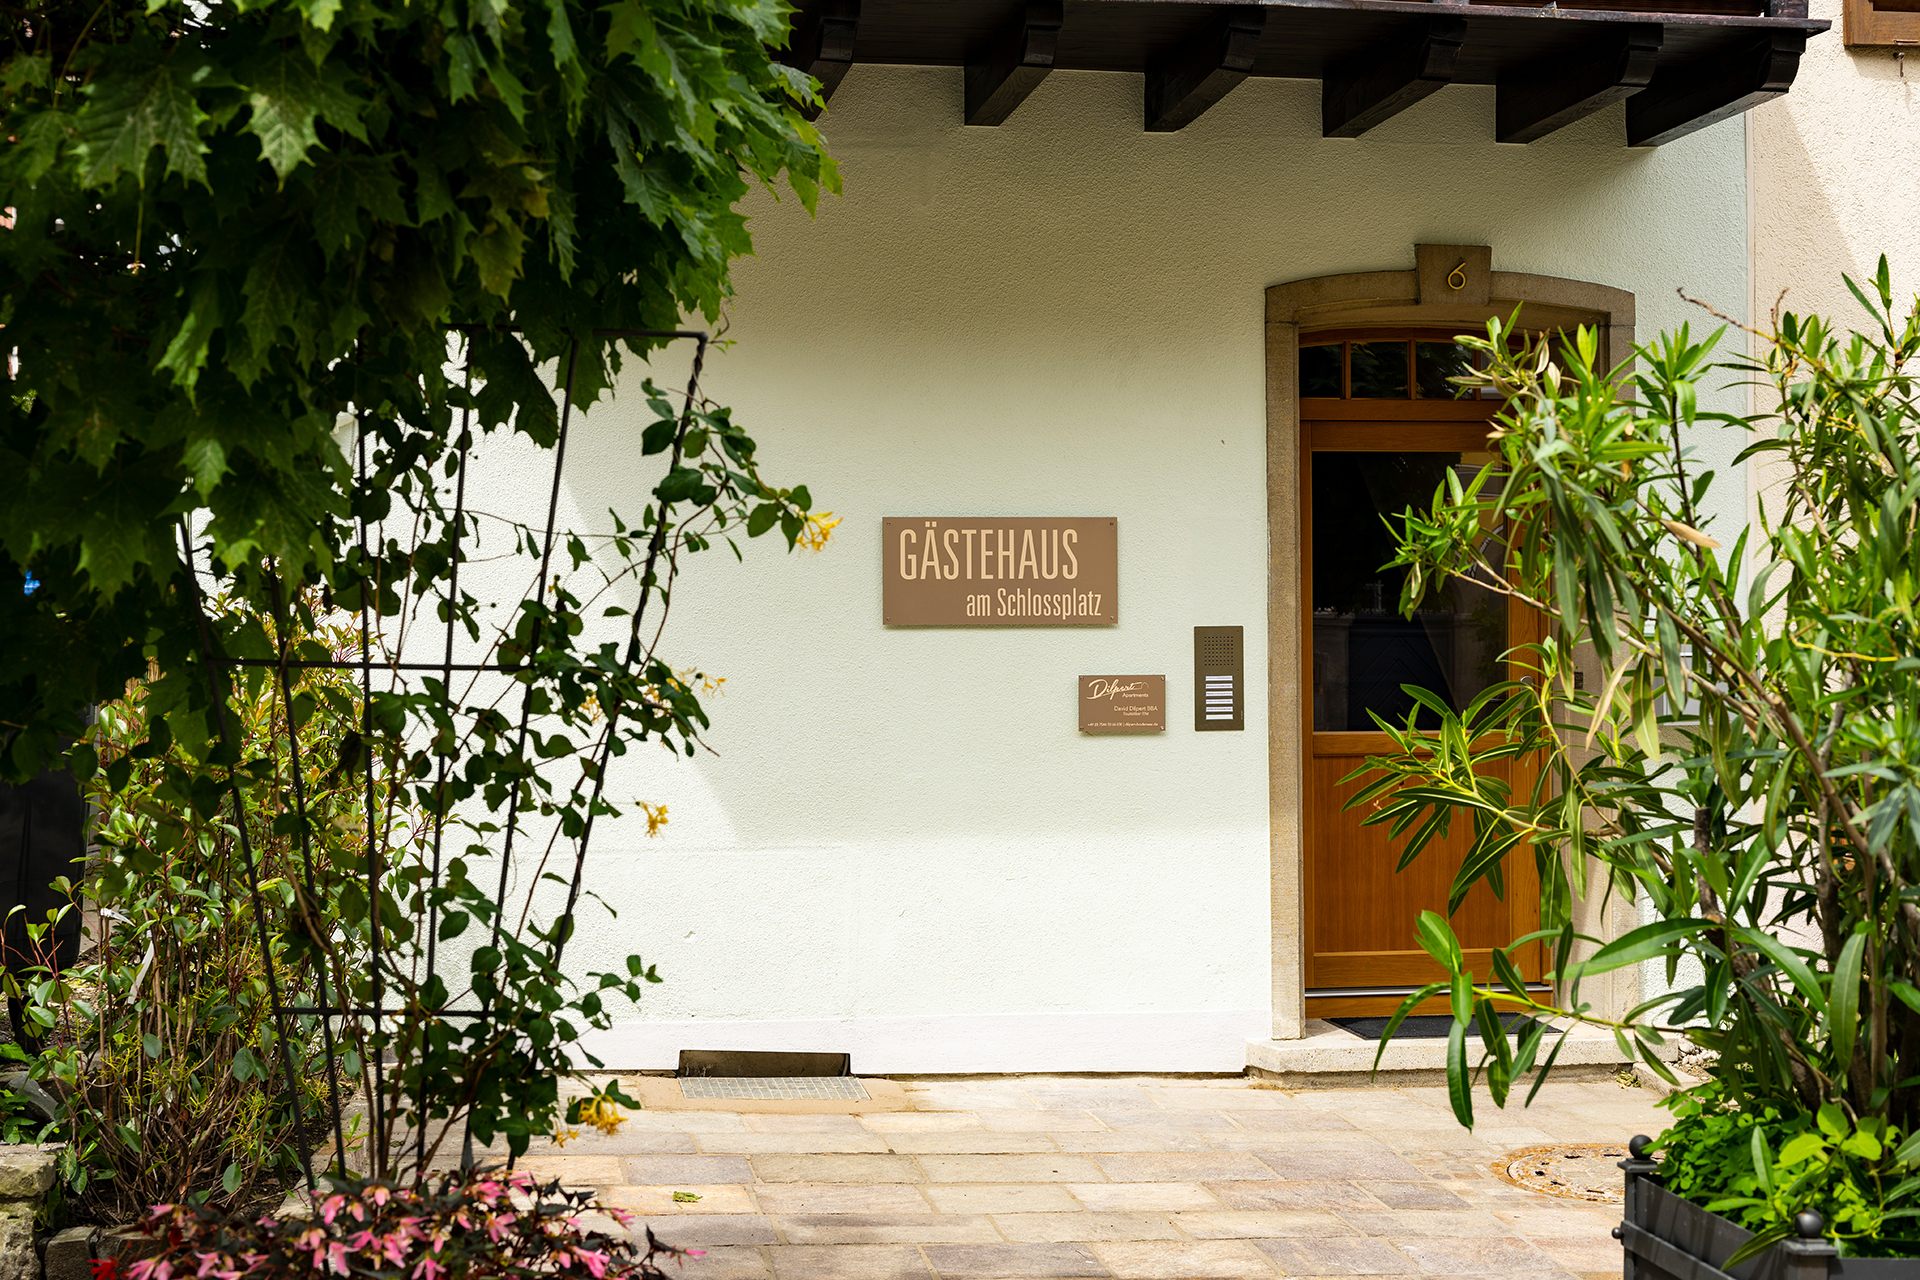 Holiday apartments on Lake Constance: Guest House "Am Schlossplatz", Room #1 - Entrance